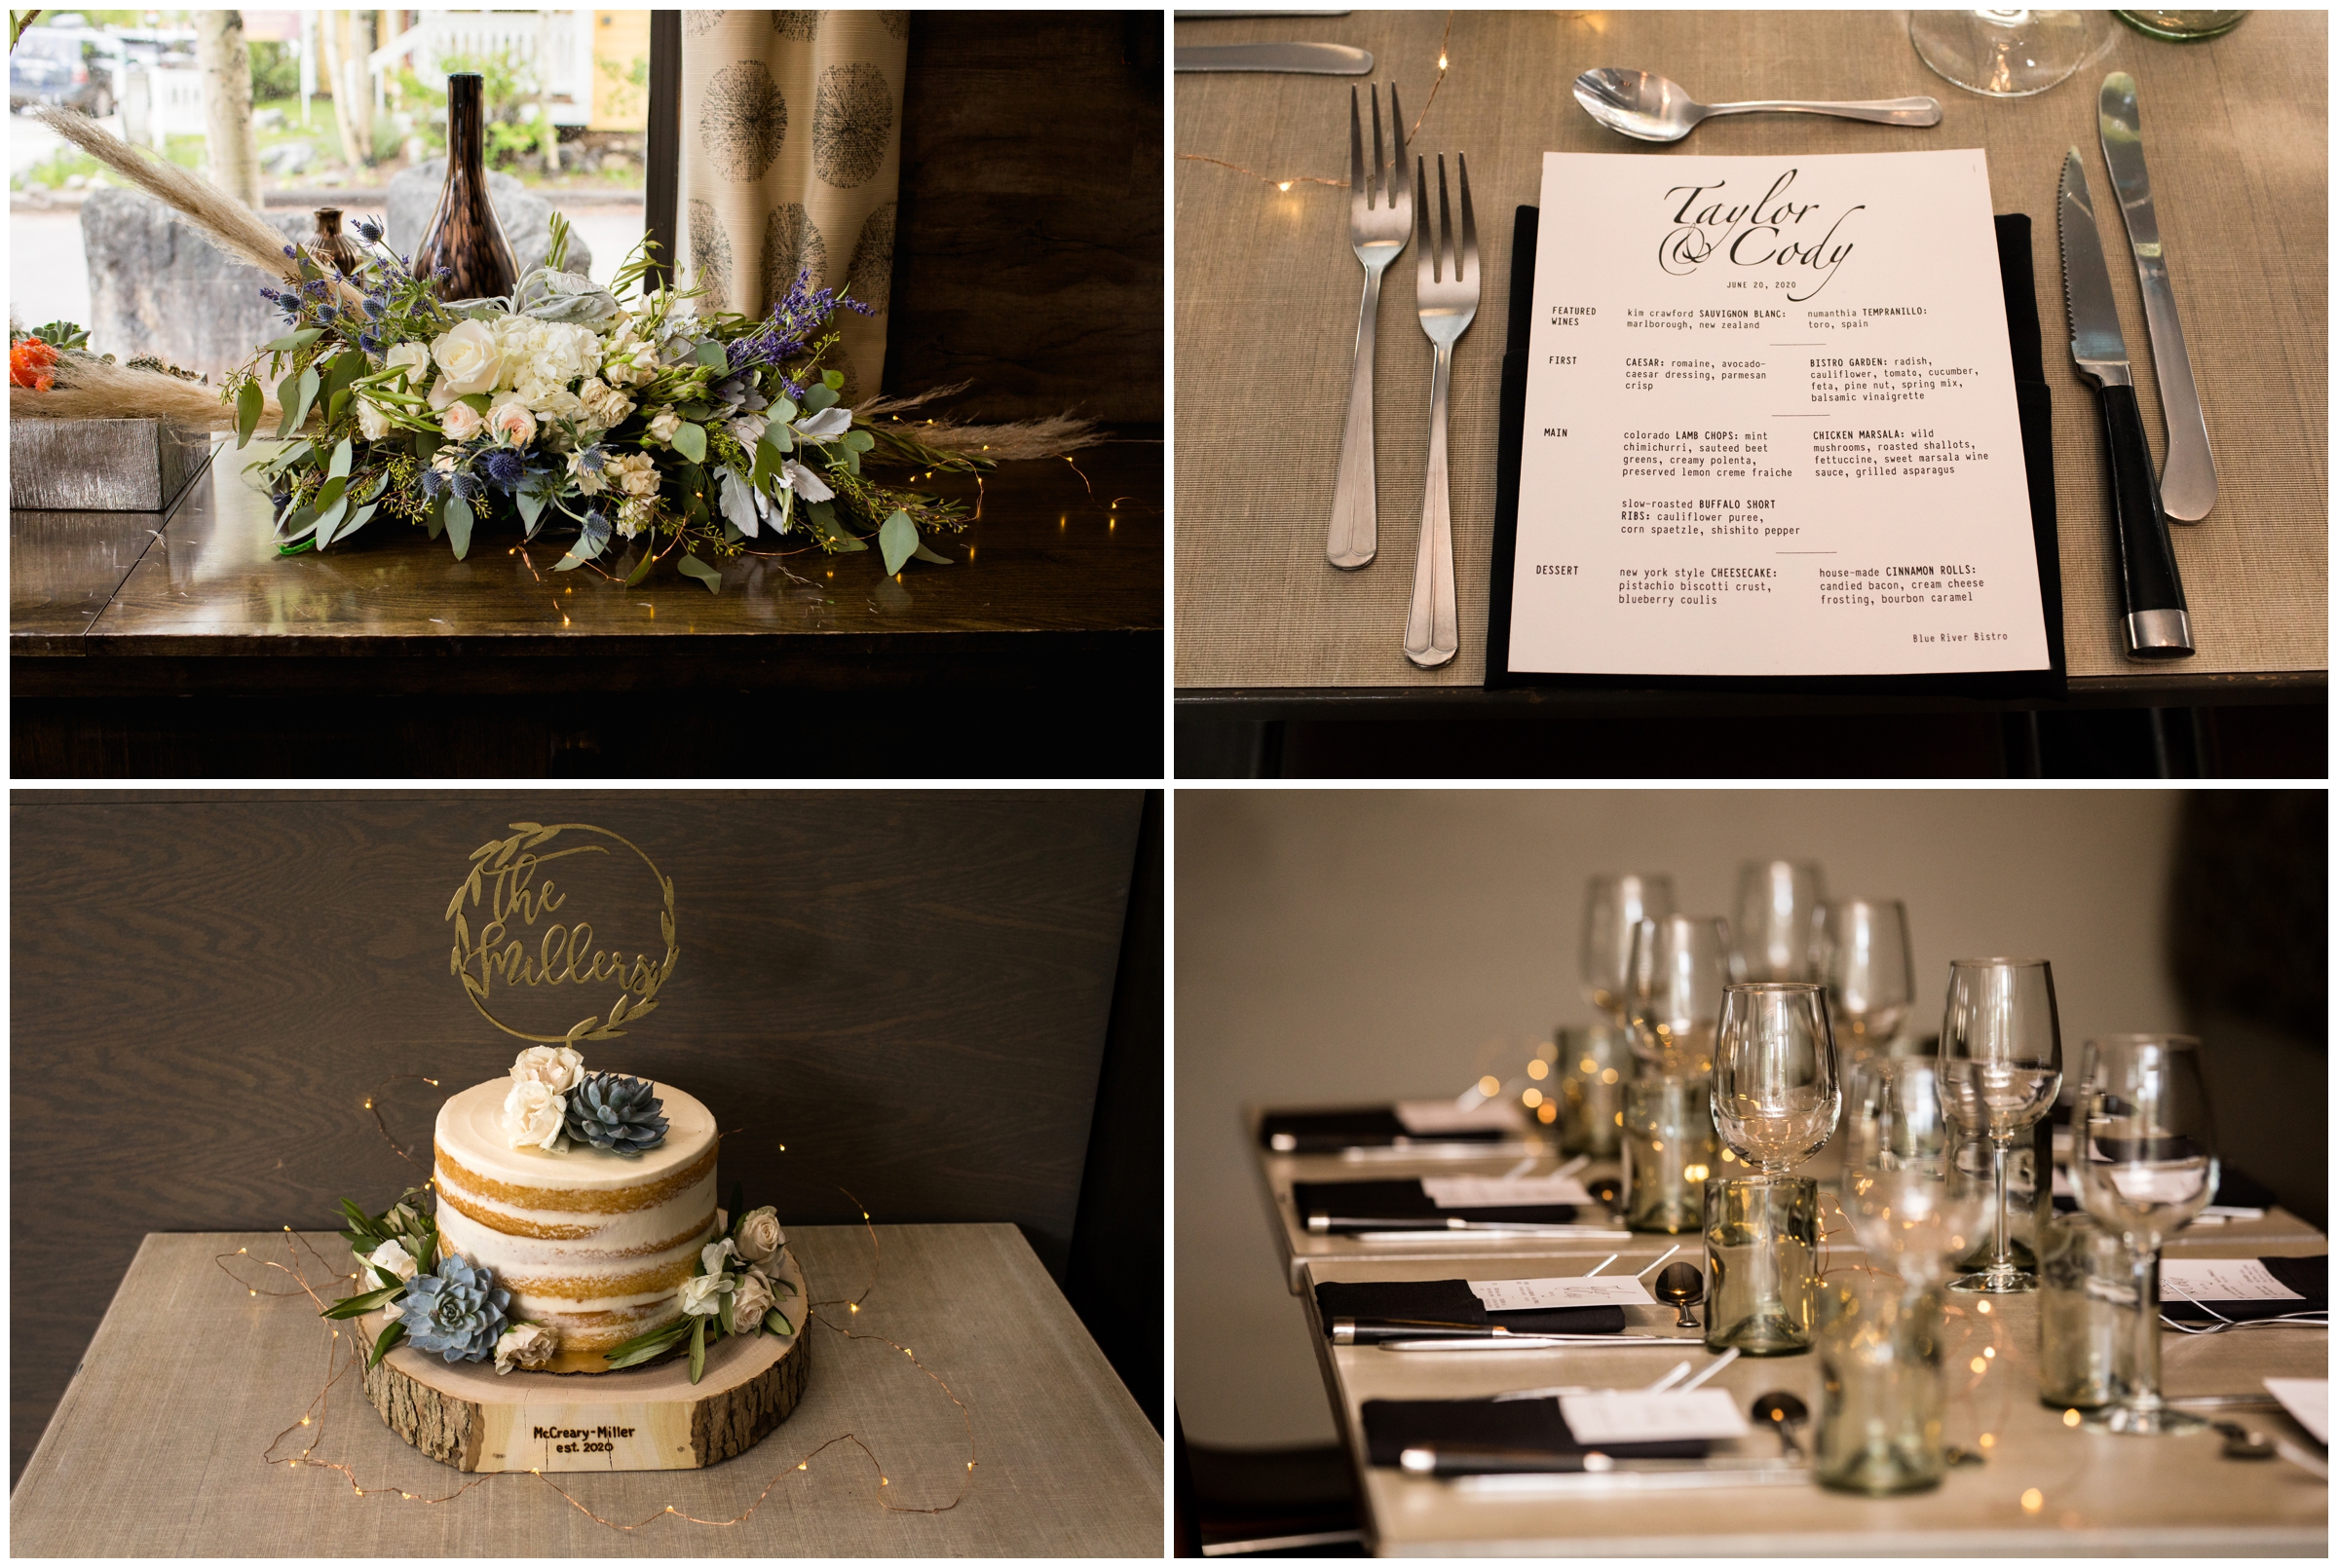 reception details at intimate restaurant wedding reception in the colorado mountains